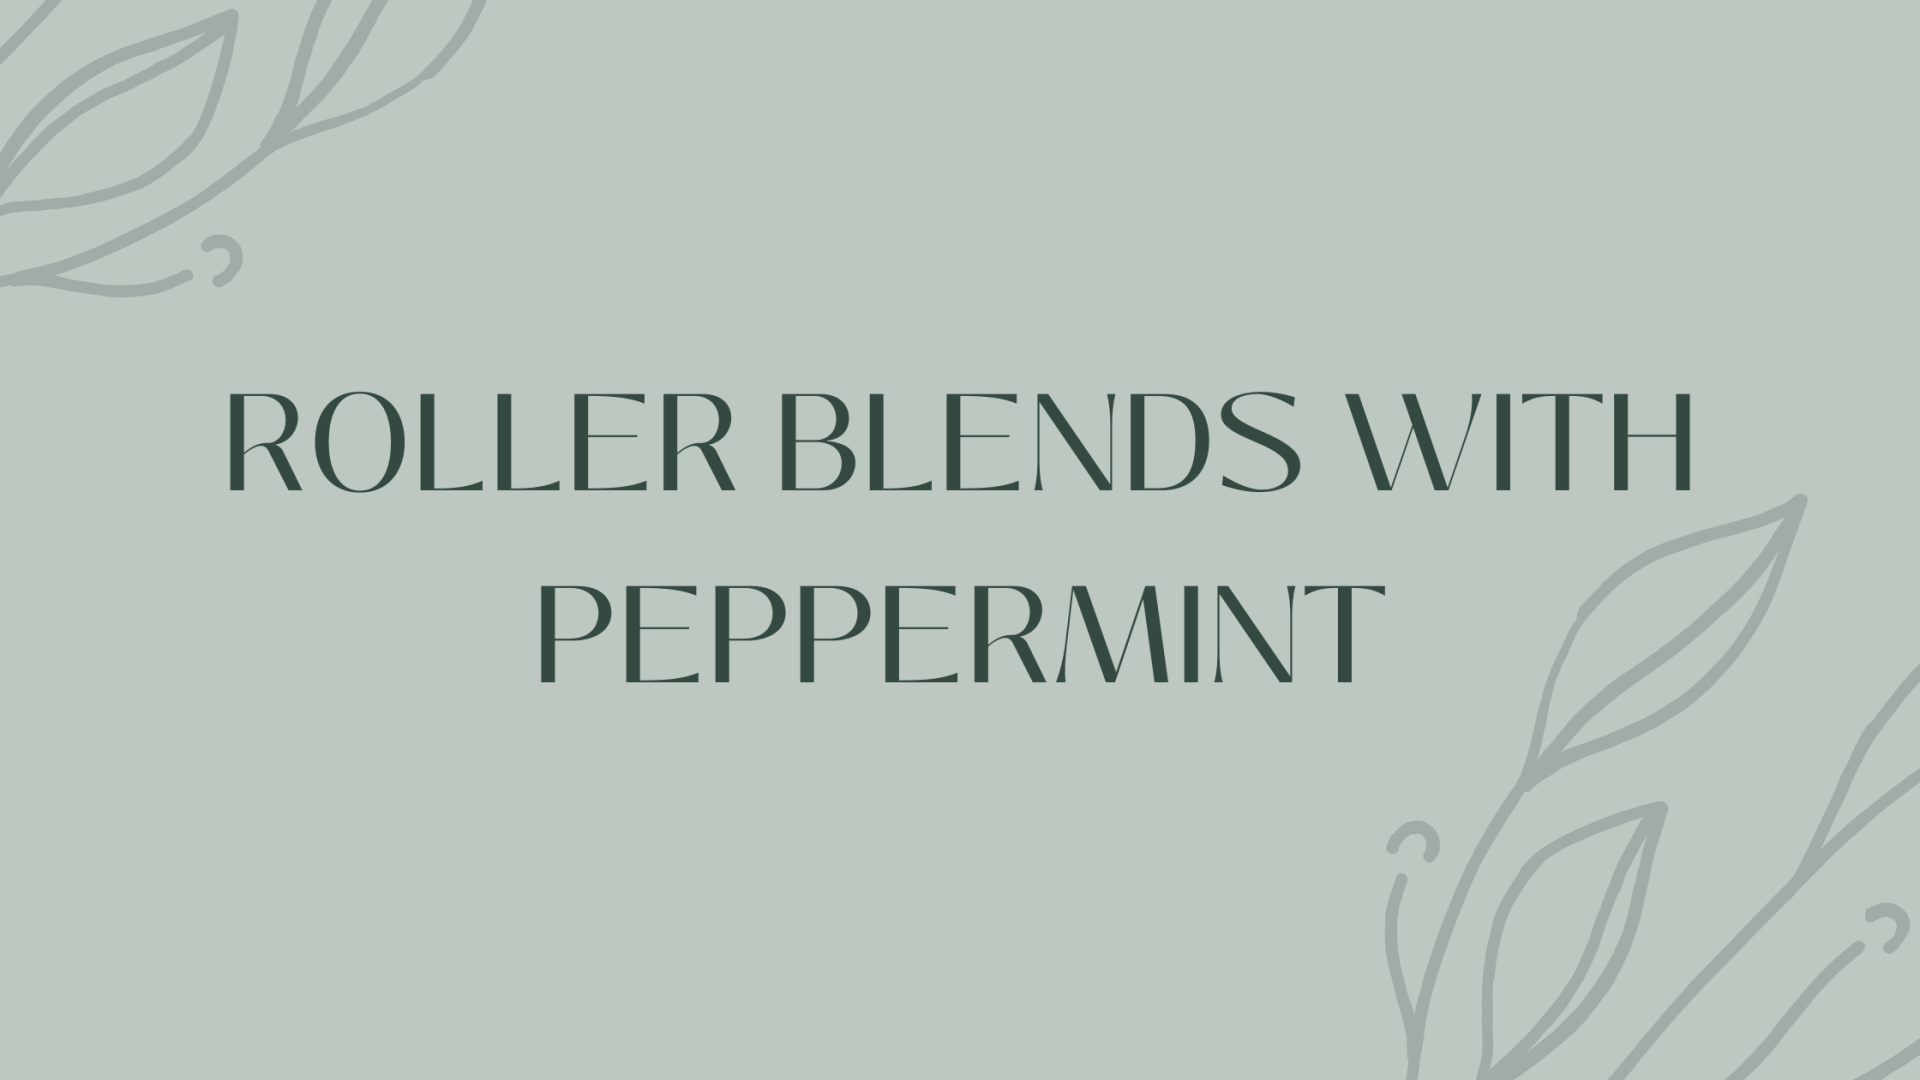 Roller Blends With Peppermint